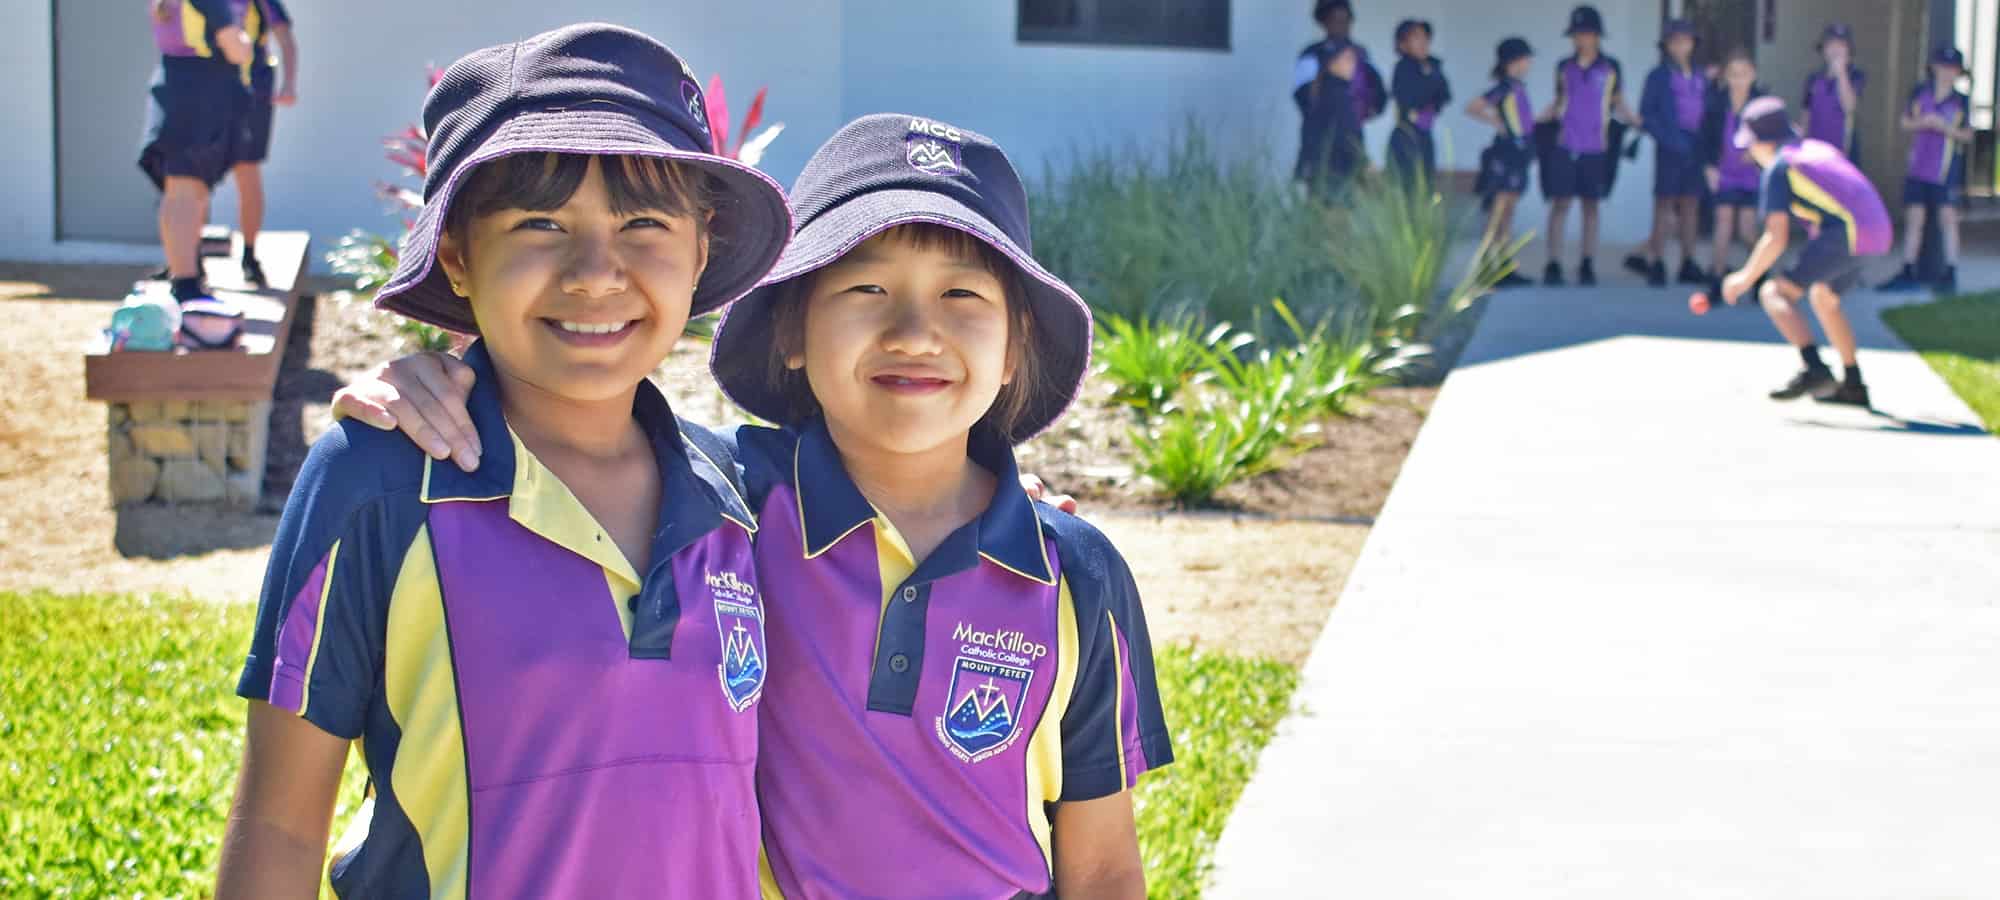 Calling all Parents! Are You Looking for an Outstanding School in Cairns?